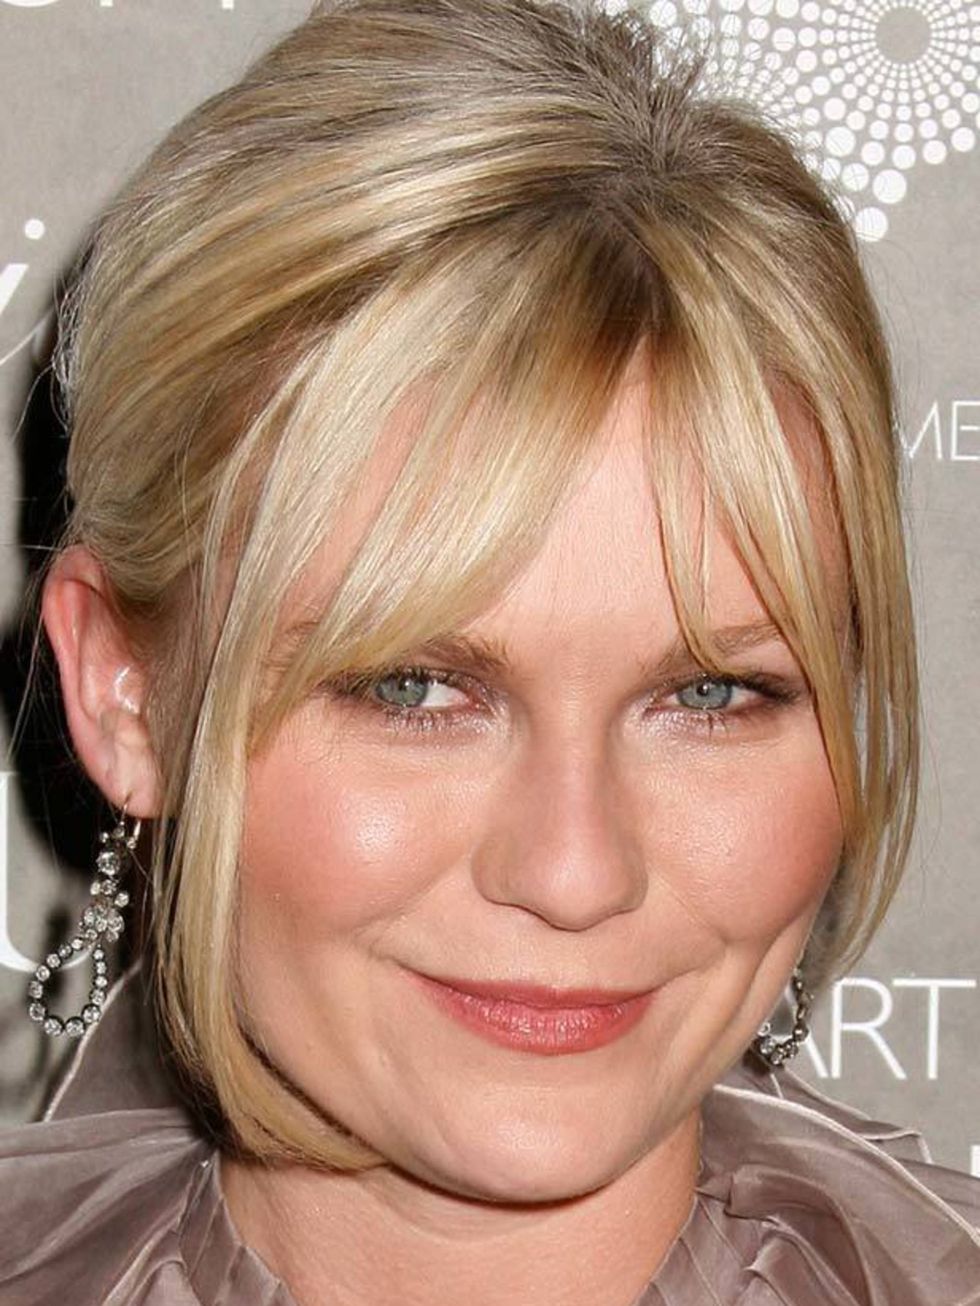 <p><a href="http://www.elleuk.com/beauty/celeb-beauty/celeb-beauty-bags/%28section%29/kirsten-dunst-favourite-beauty-buys">Click here to see the beauty products Kirsten can't live without</a></p>